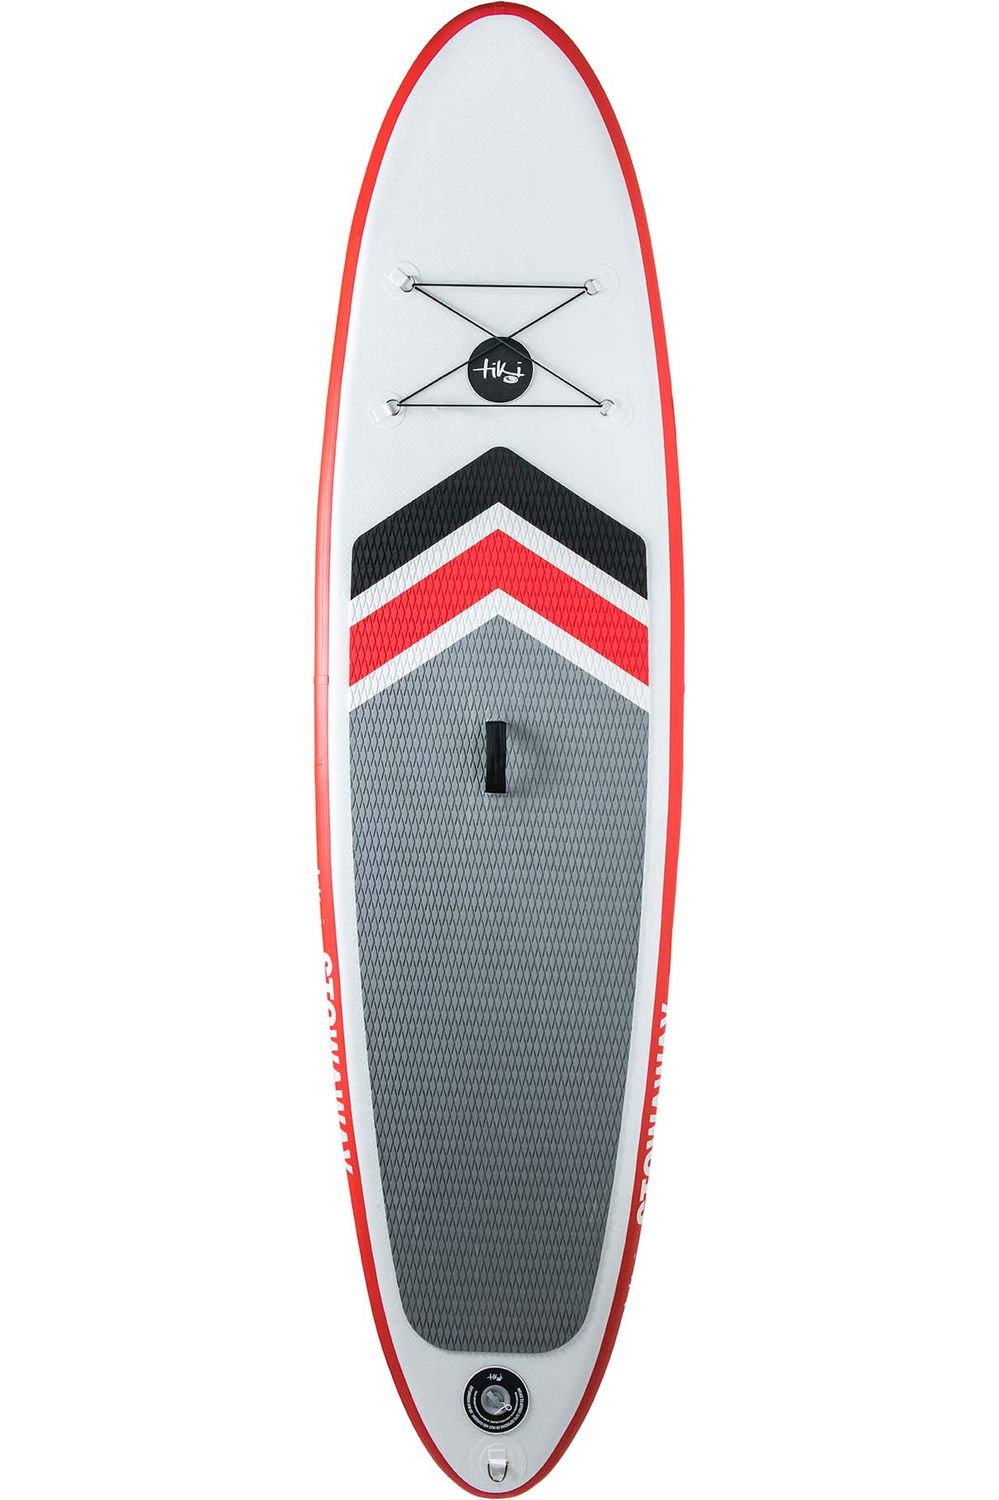 Tiki 10'6 Stowaway Classic Inflatable SUP + Accessories